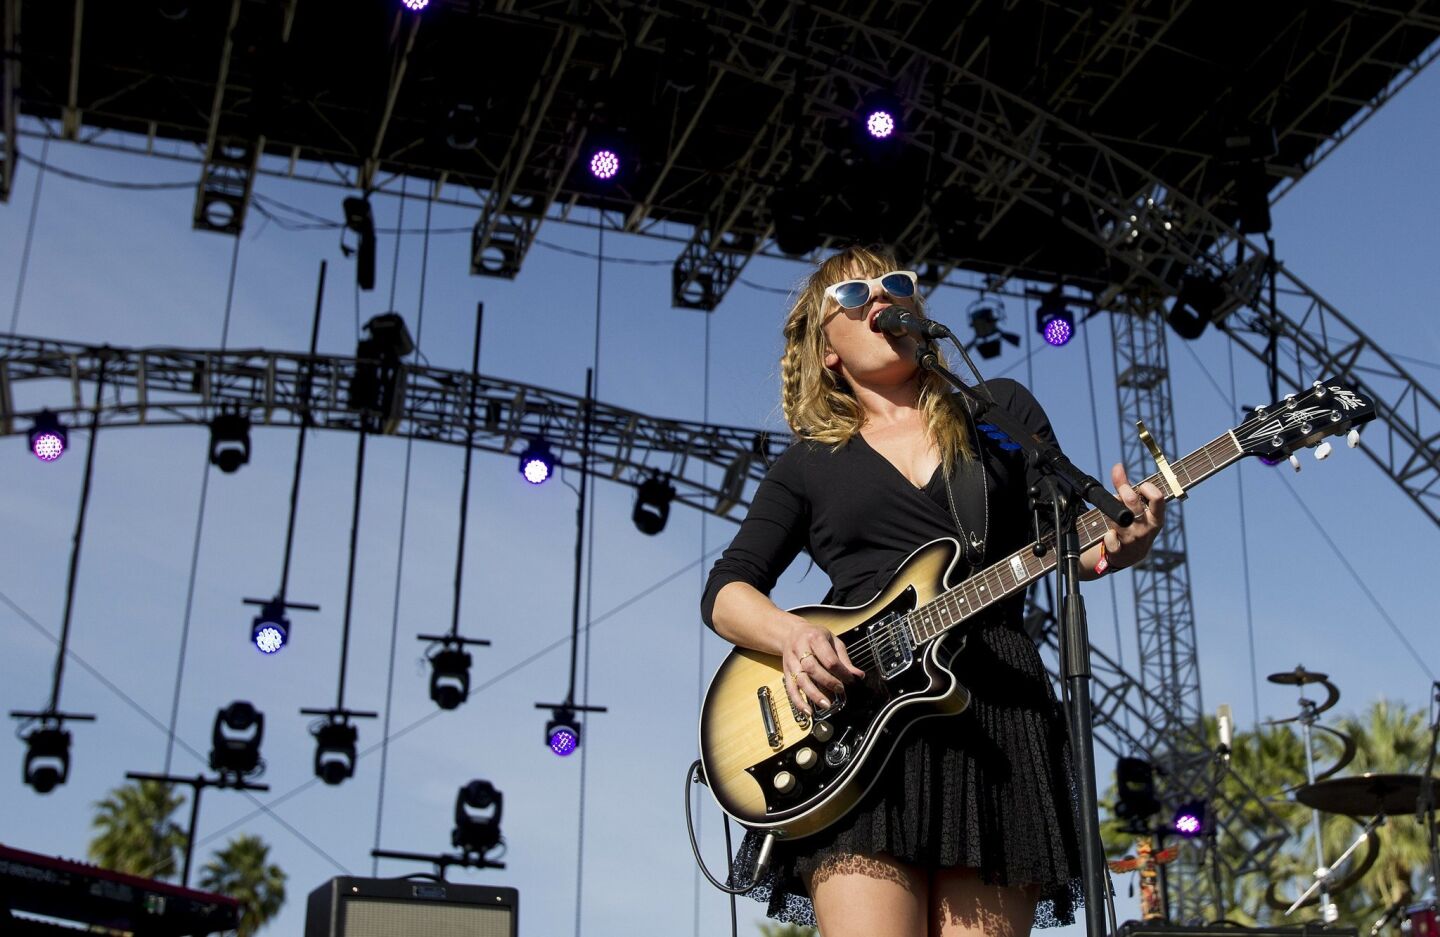 The 2015 Coachella Valley Music and Arts Festival gets underway. Julia Stone of Angus and Julia Stone on the Outdoor Stage Friday.